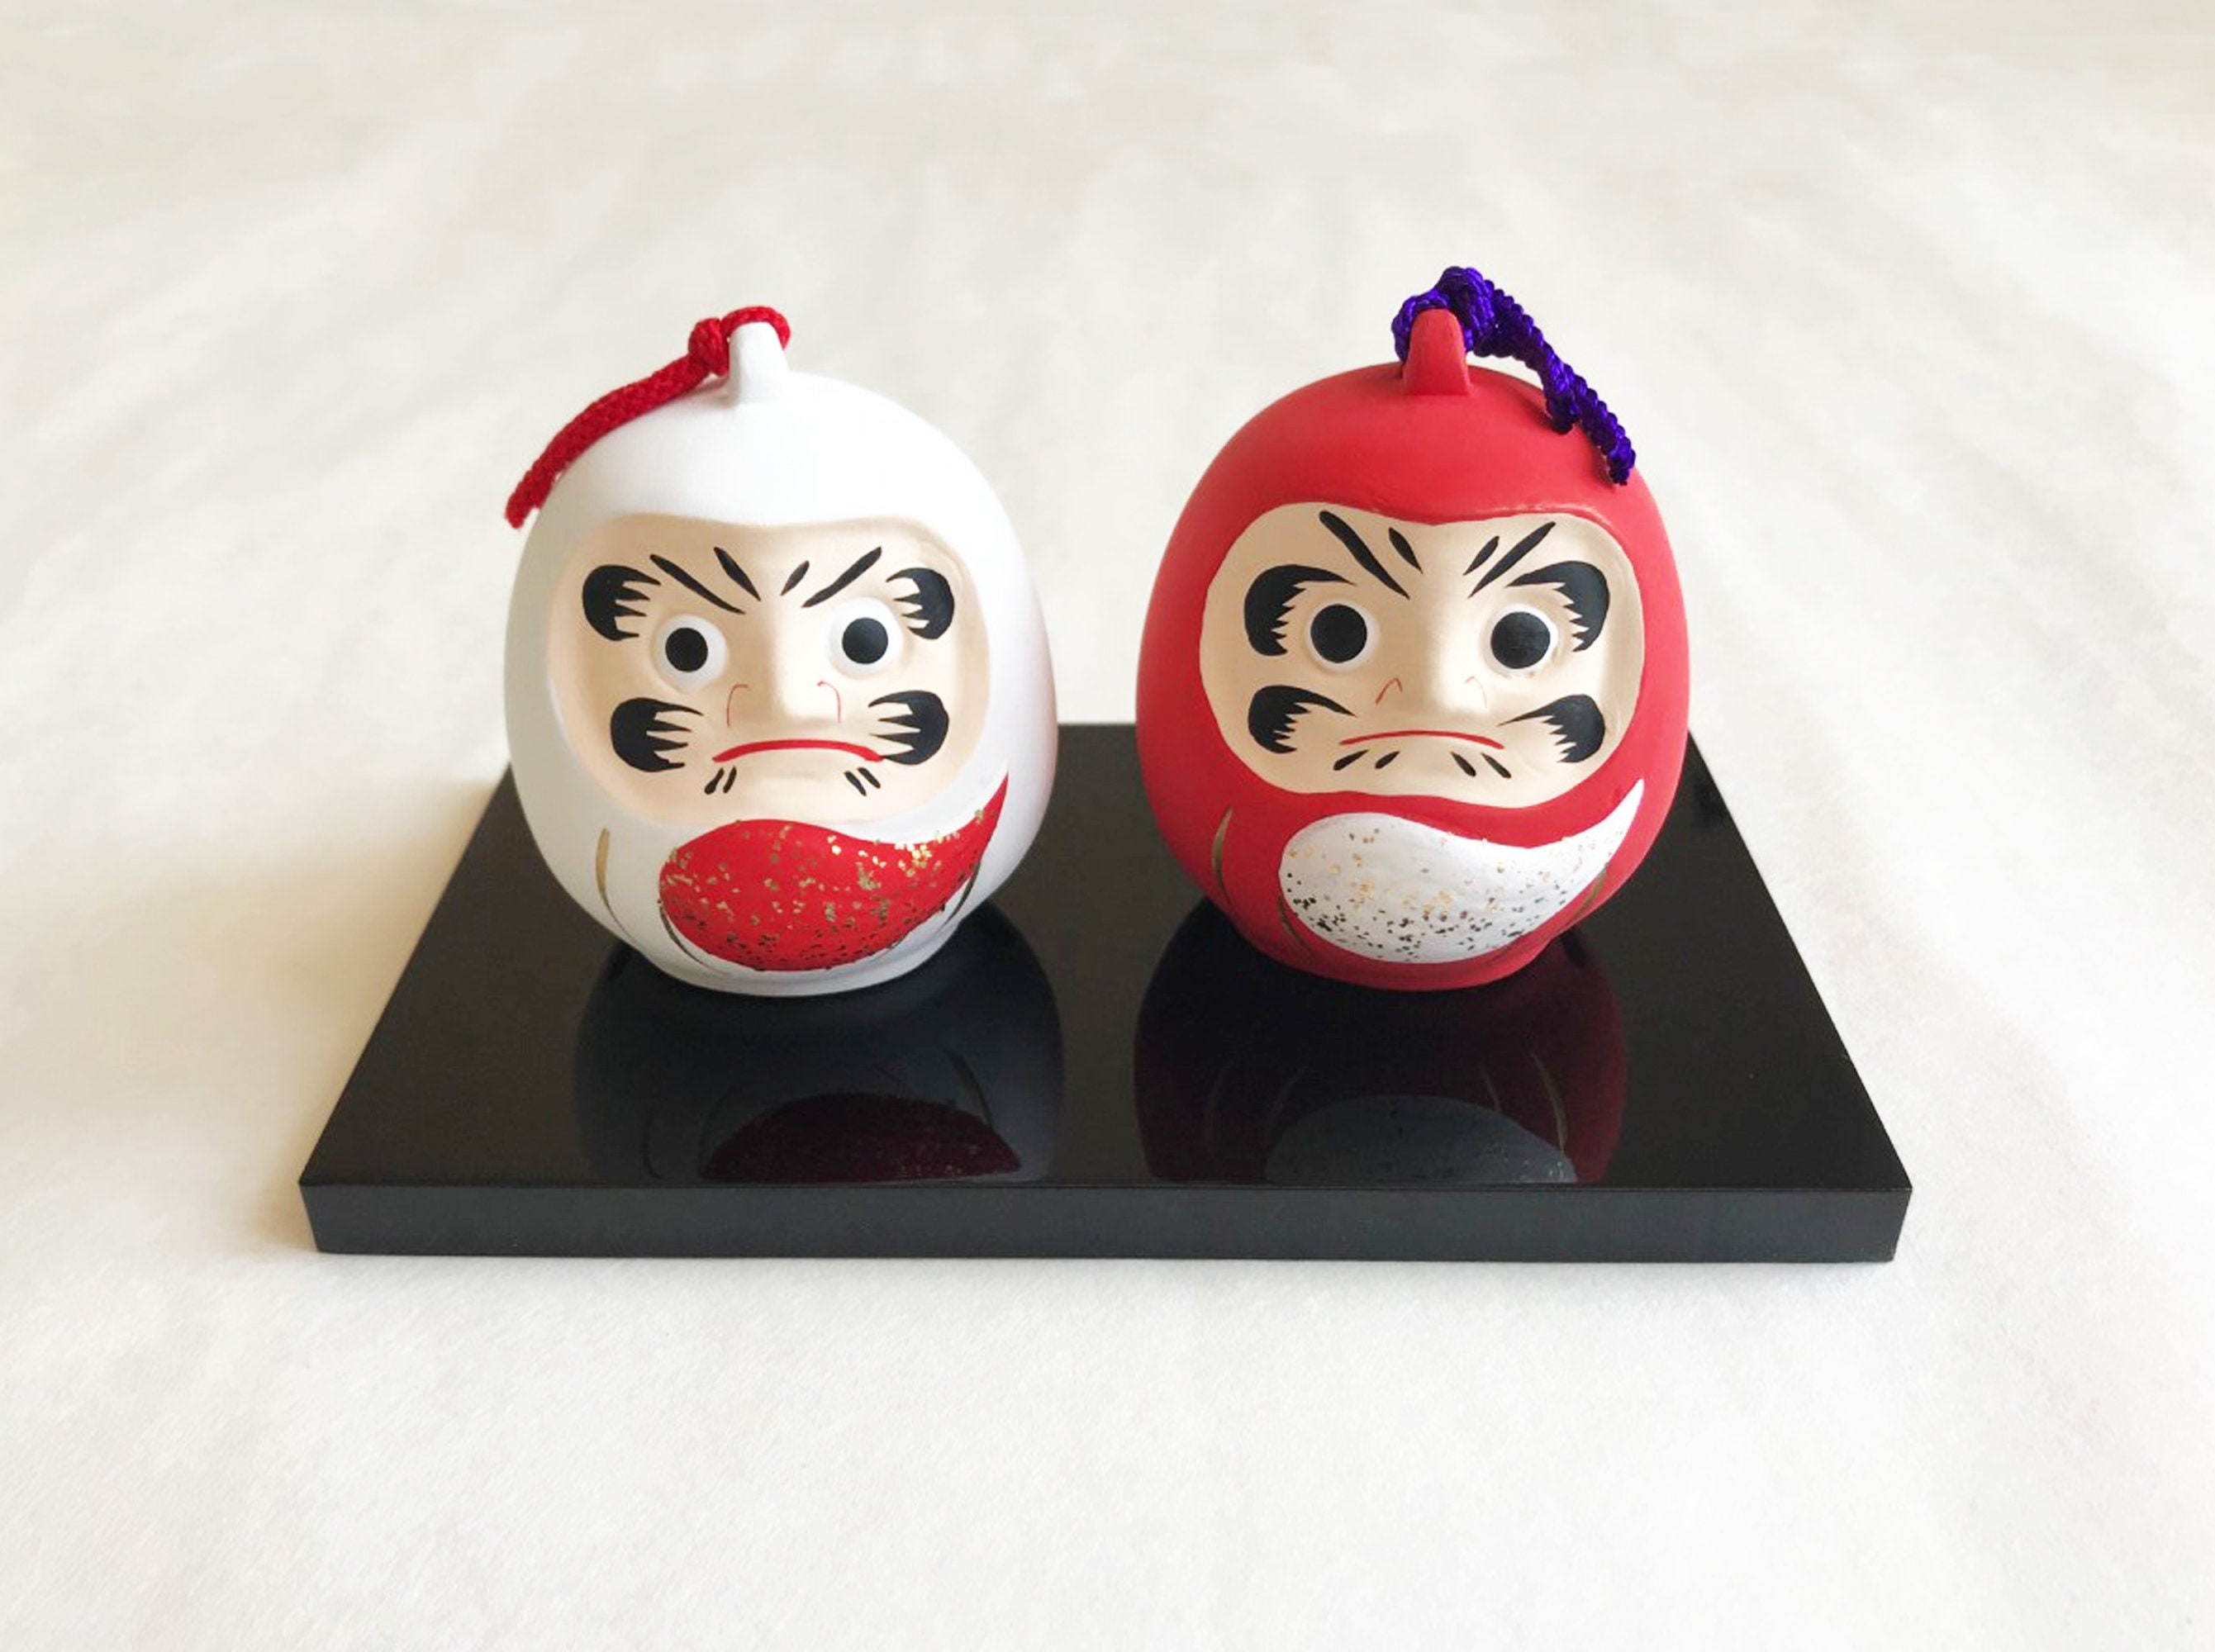 Couple Lucky Daruma Doll Set with Black Lacquer Painted | Etsy